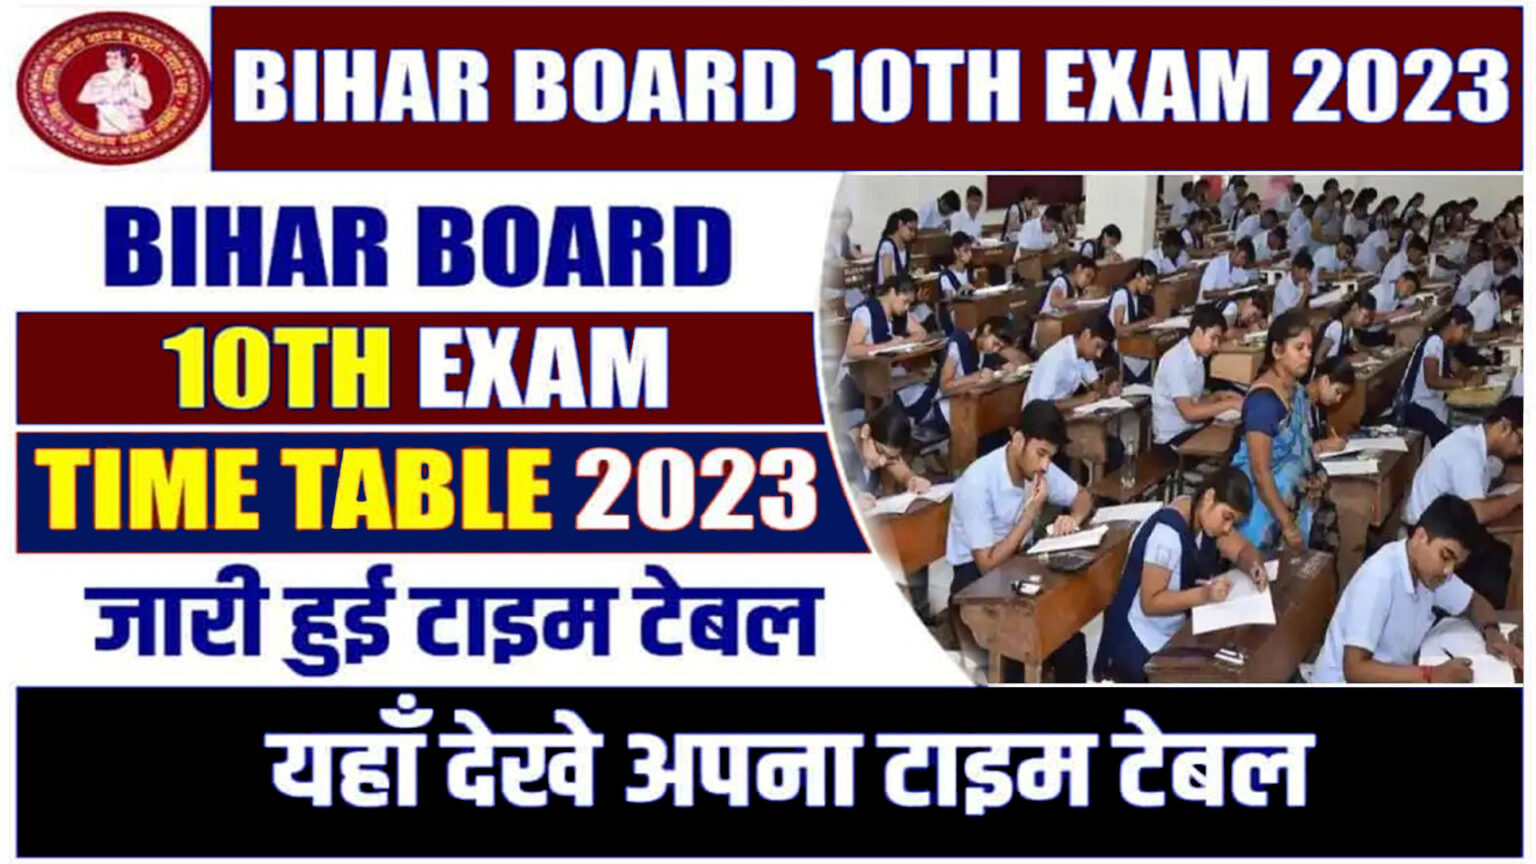 Bihar Board 10th Exam Time Table 2023 Download 10th Time Table PDF Link